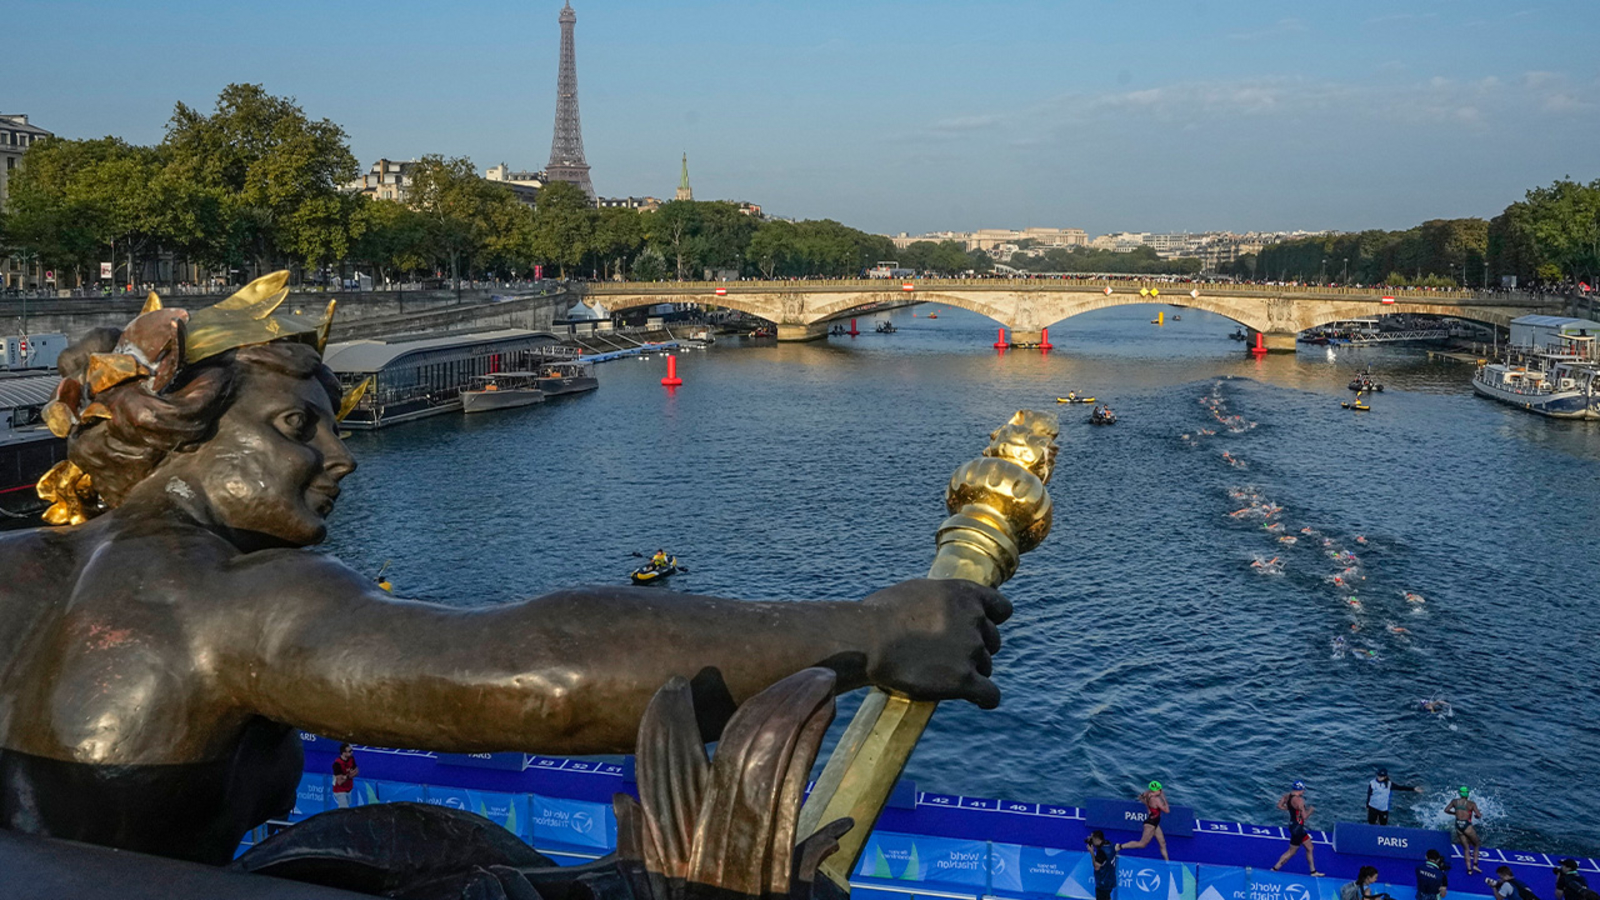 Paris Games: E.coli has been detected in the Seine River as the Olympics approach in less than two months [Video]